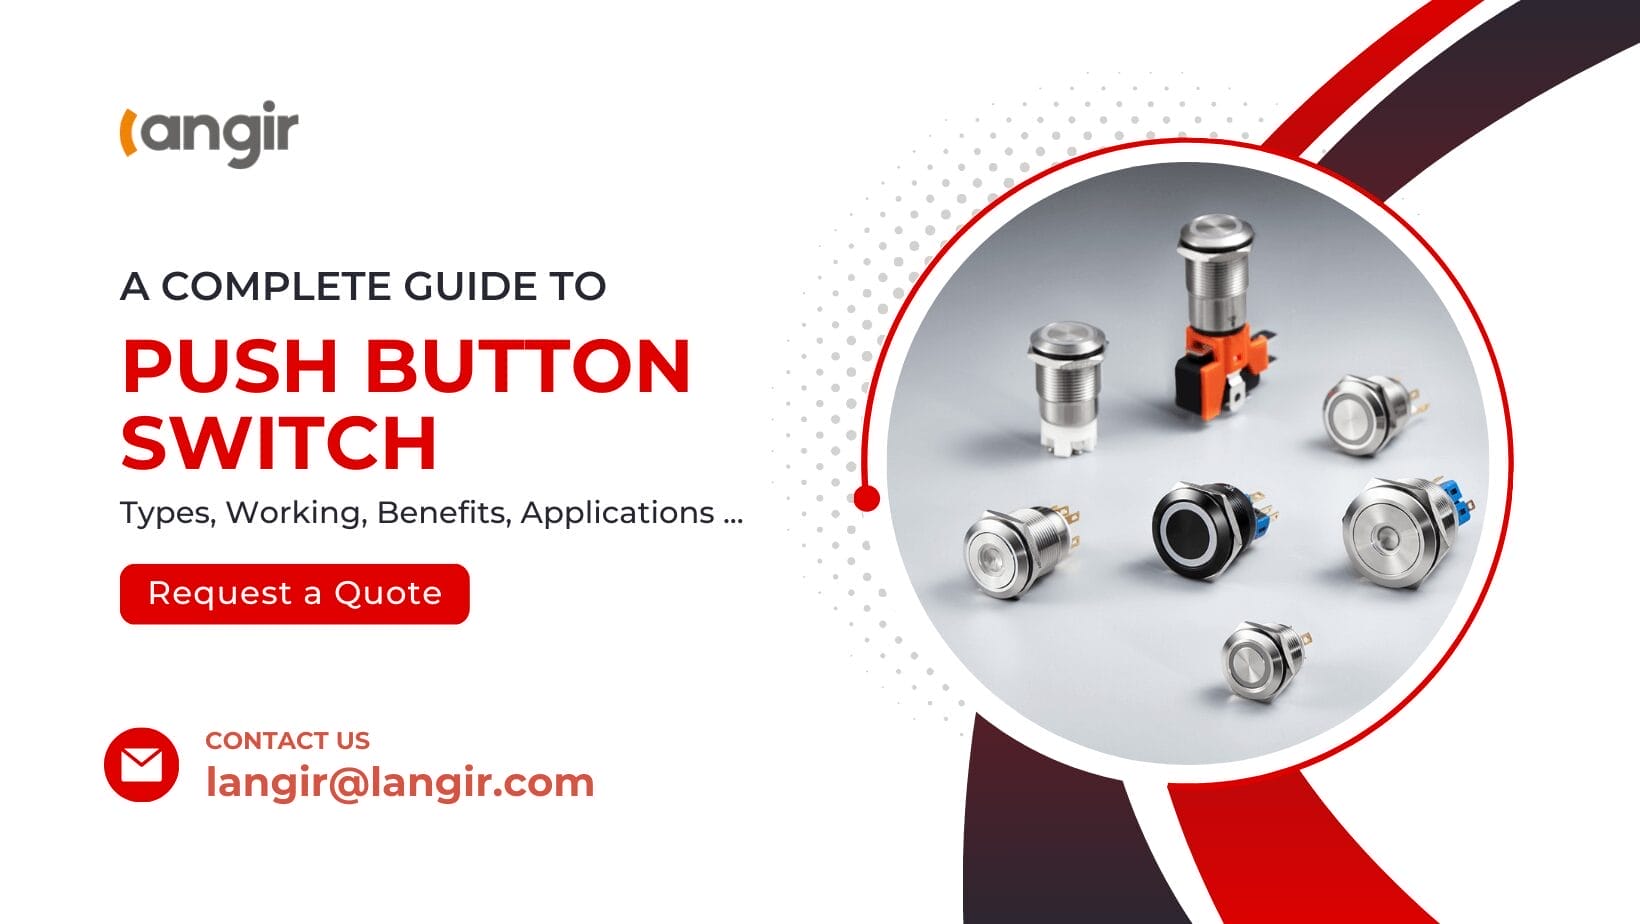 Push Button Switch A Complete Guide to Its Types and Working